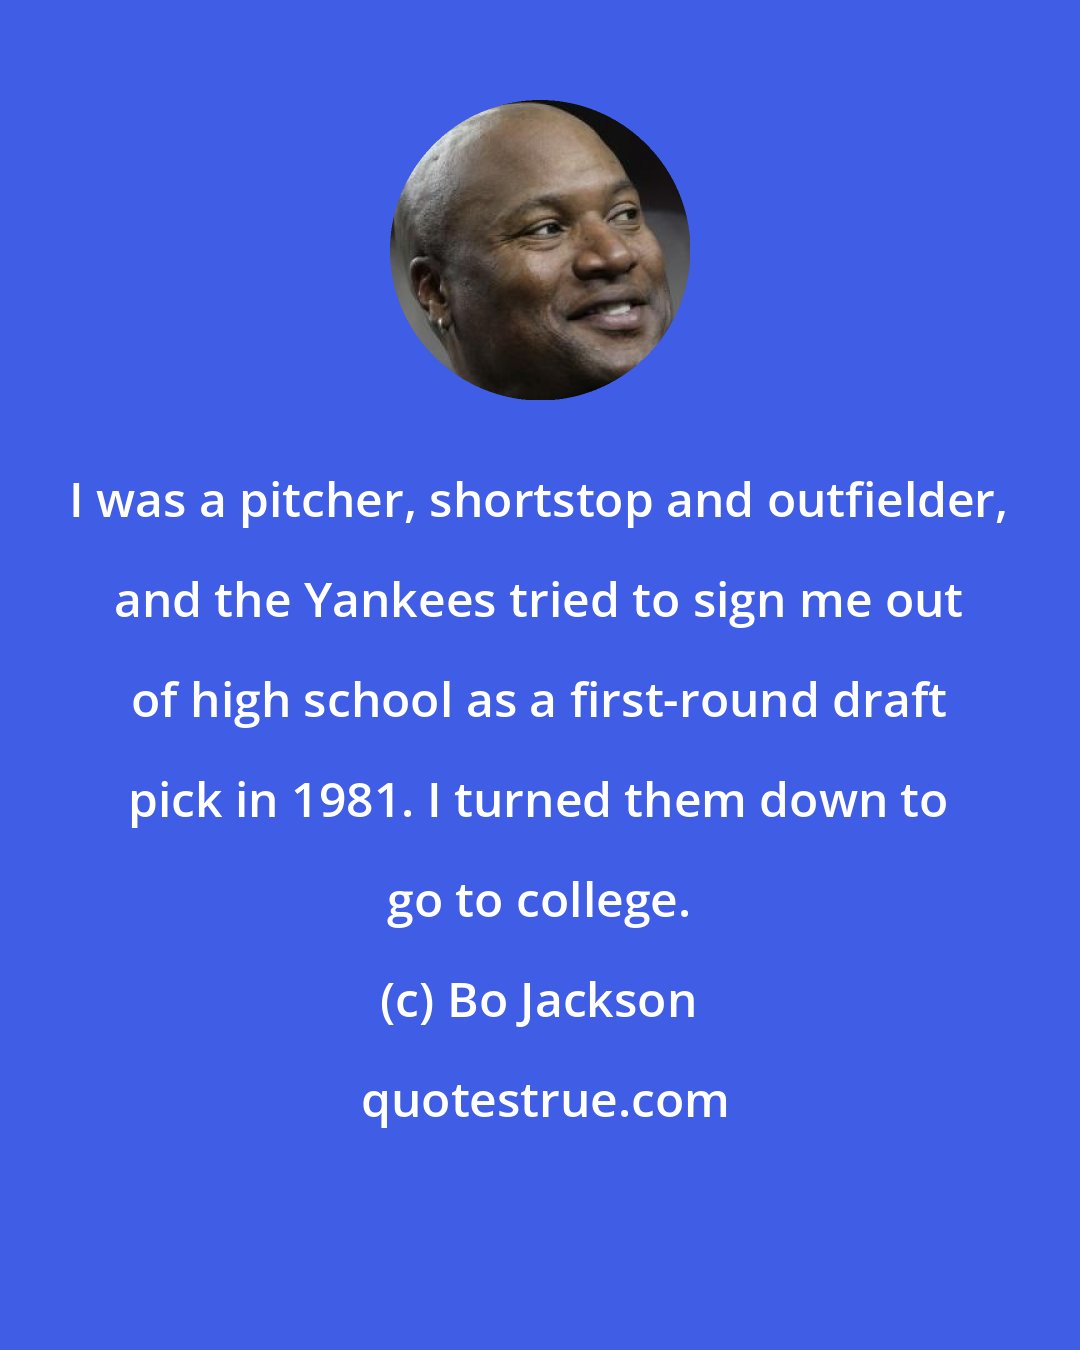 Bo Jackson: I was a pitcher, shortstop and outfielder, and the Yankees tried to sign me out of high school as a first-round draft pick in 1981. I turned them down to go to college.